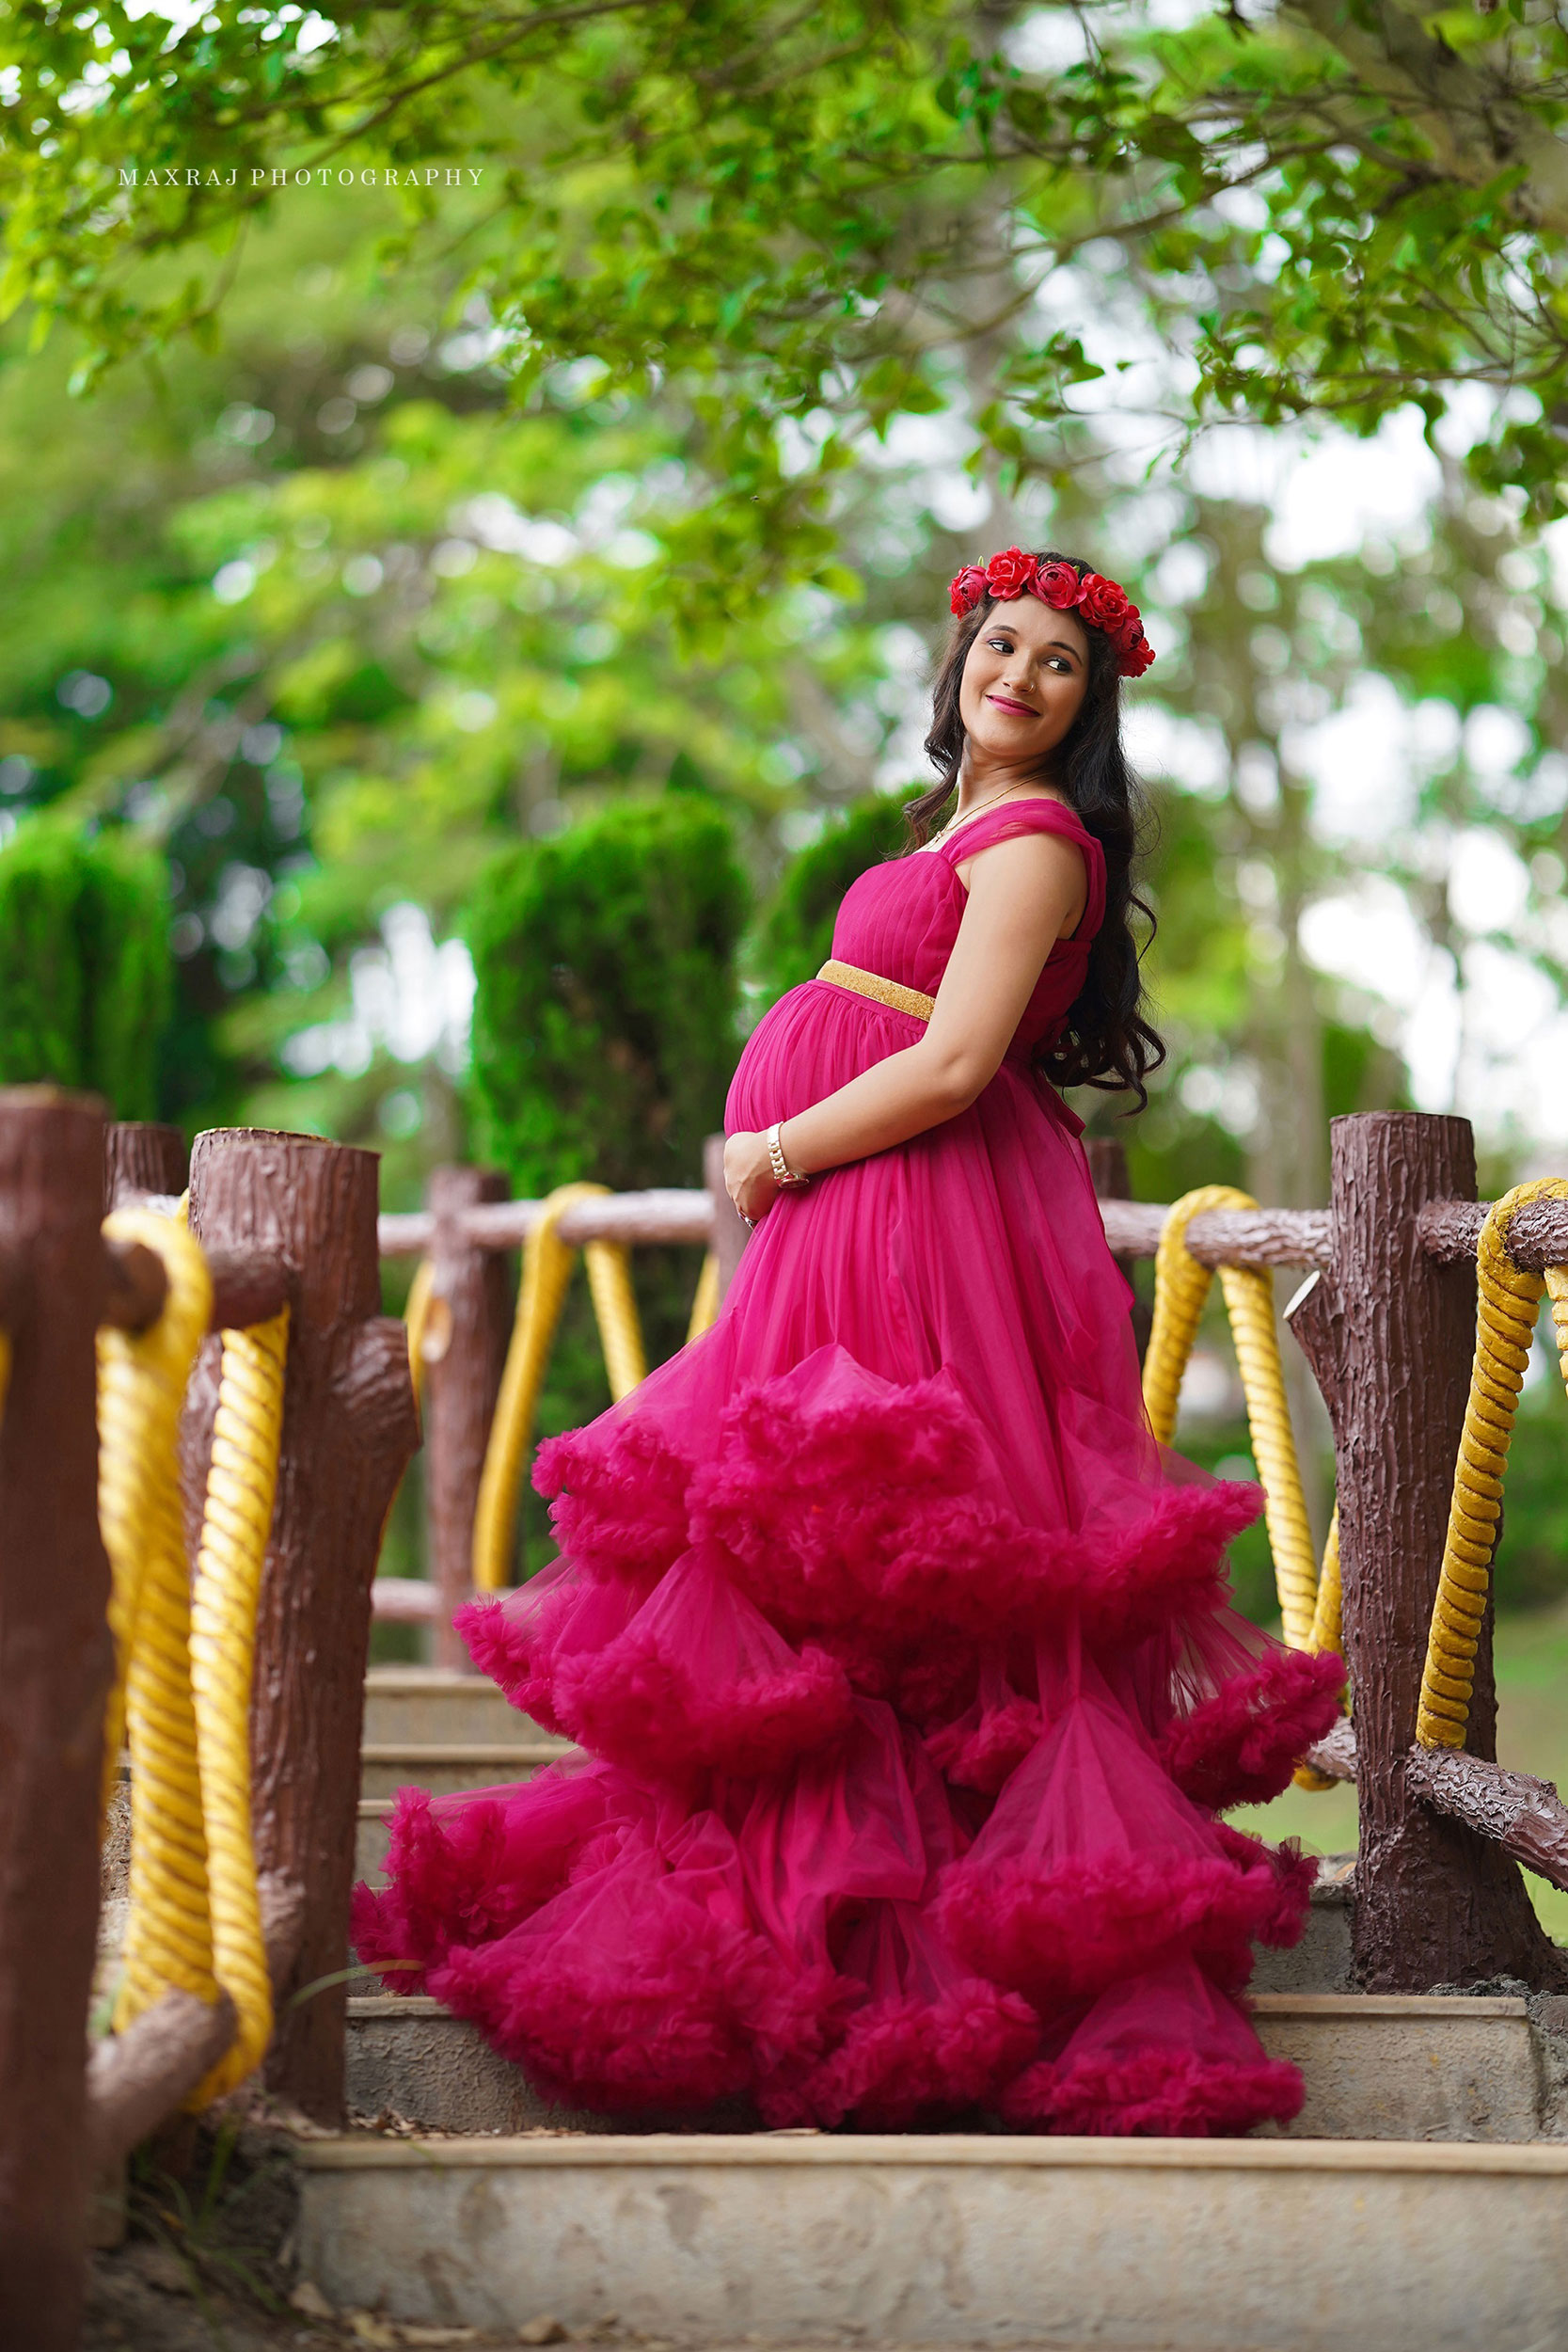 best maternity photographer in pune, best maternity photographer in india, maternity photoshoot in pune in pink gown